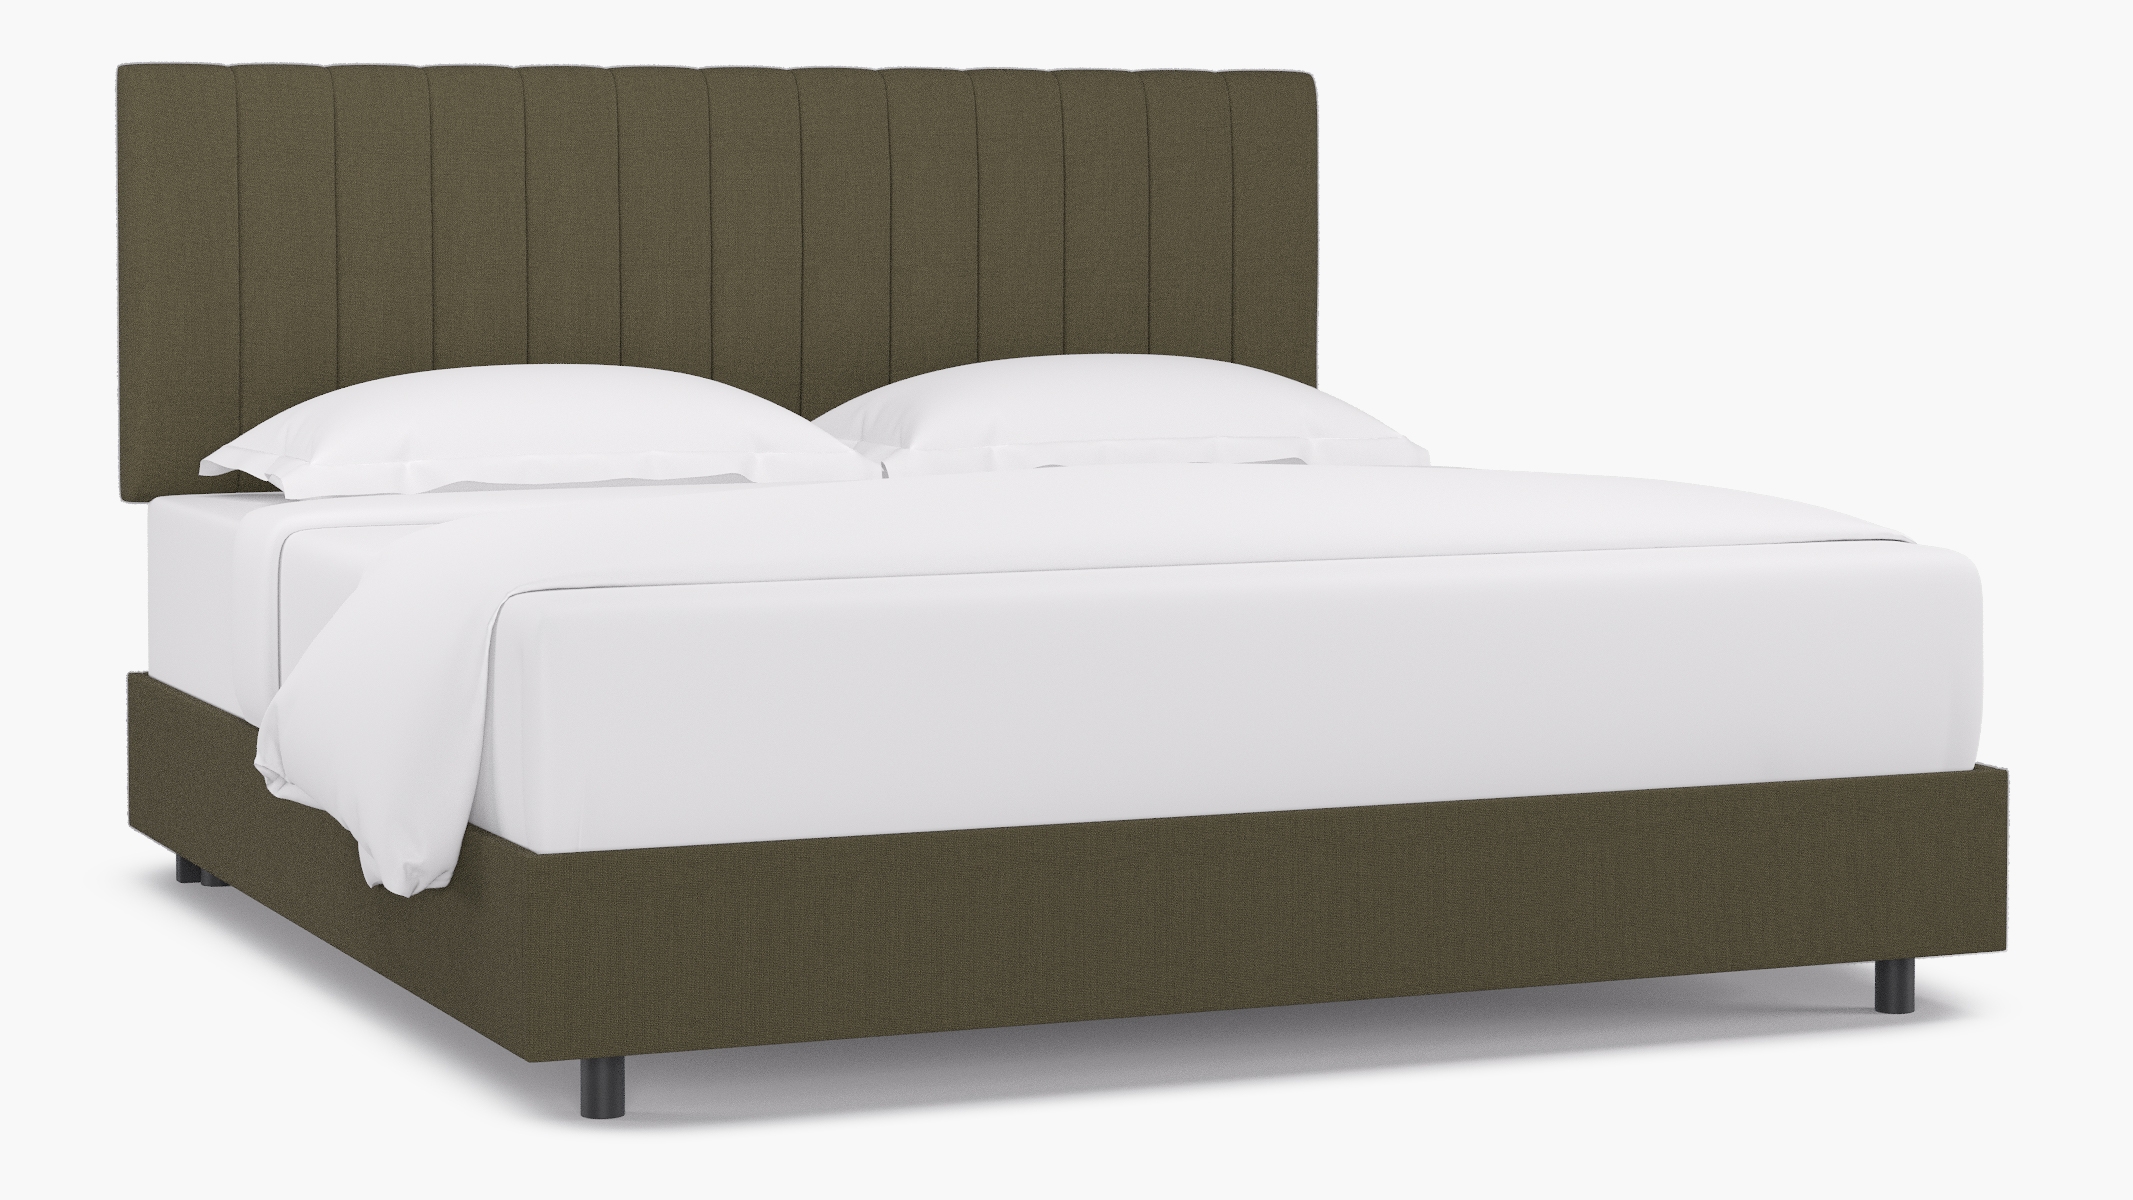 Channel Tufted Bed, Olive Everyday Linen, King - Image 1